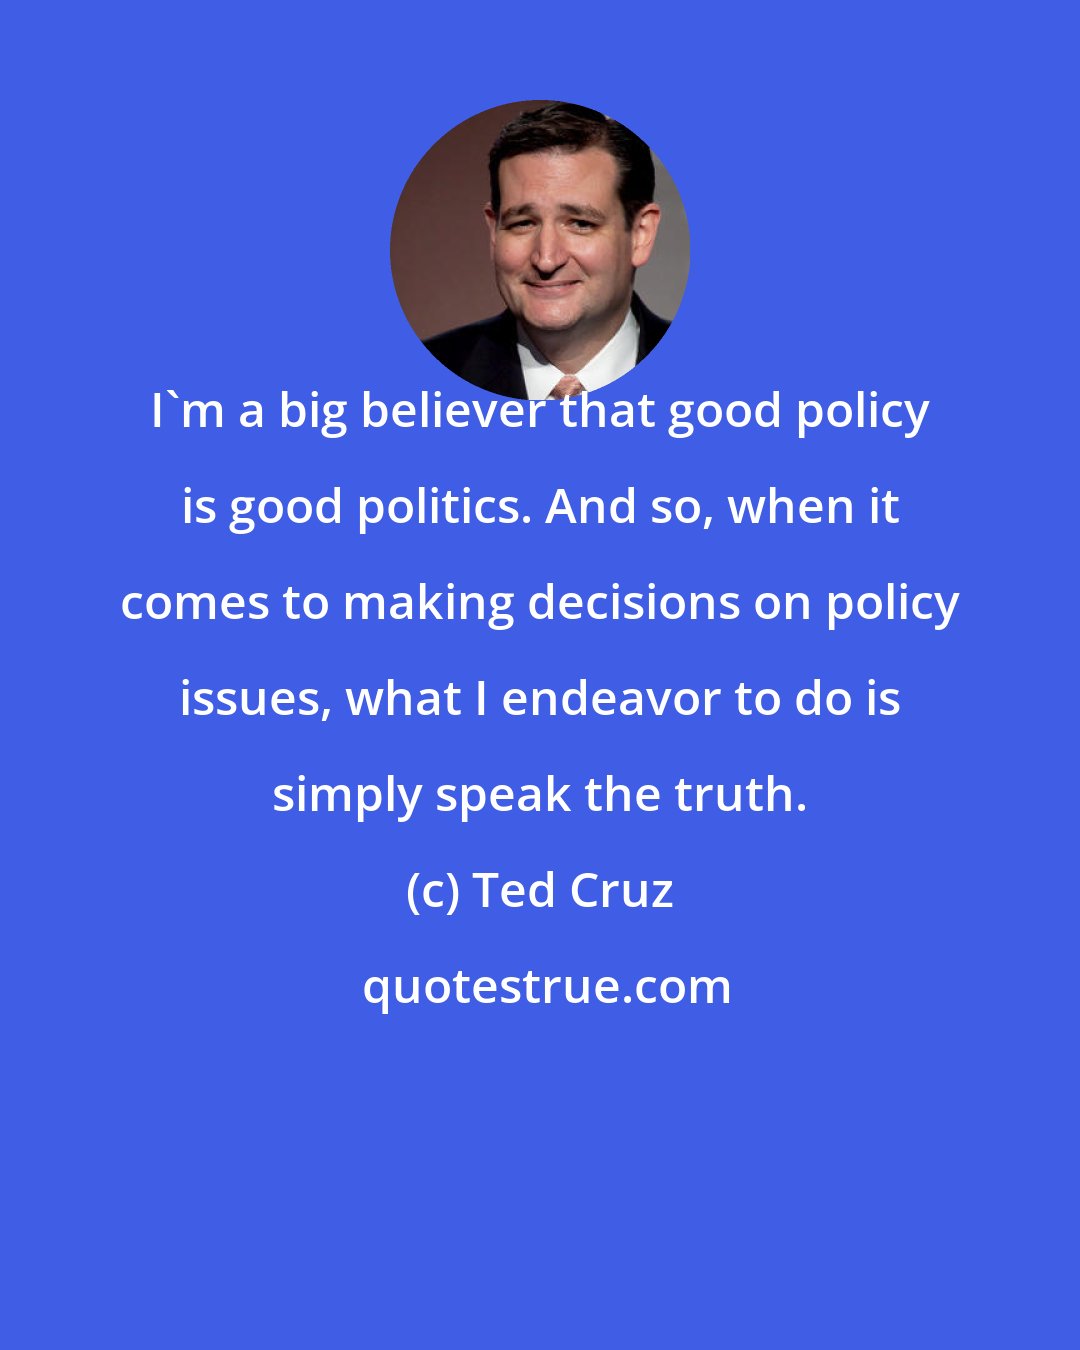 Ted Cruz: I'm a big believer that good policy is good politics. And so, when it comes to making decisions on policy issues, what I endeavor to do is simply speak the truth.